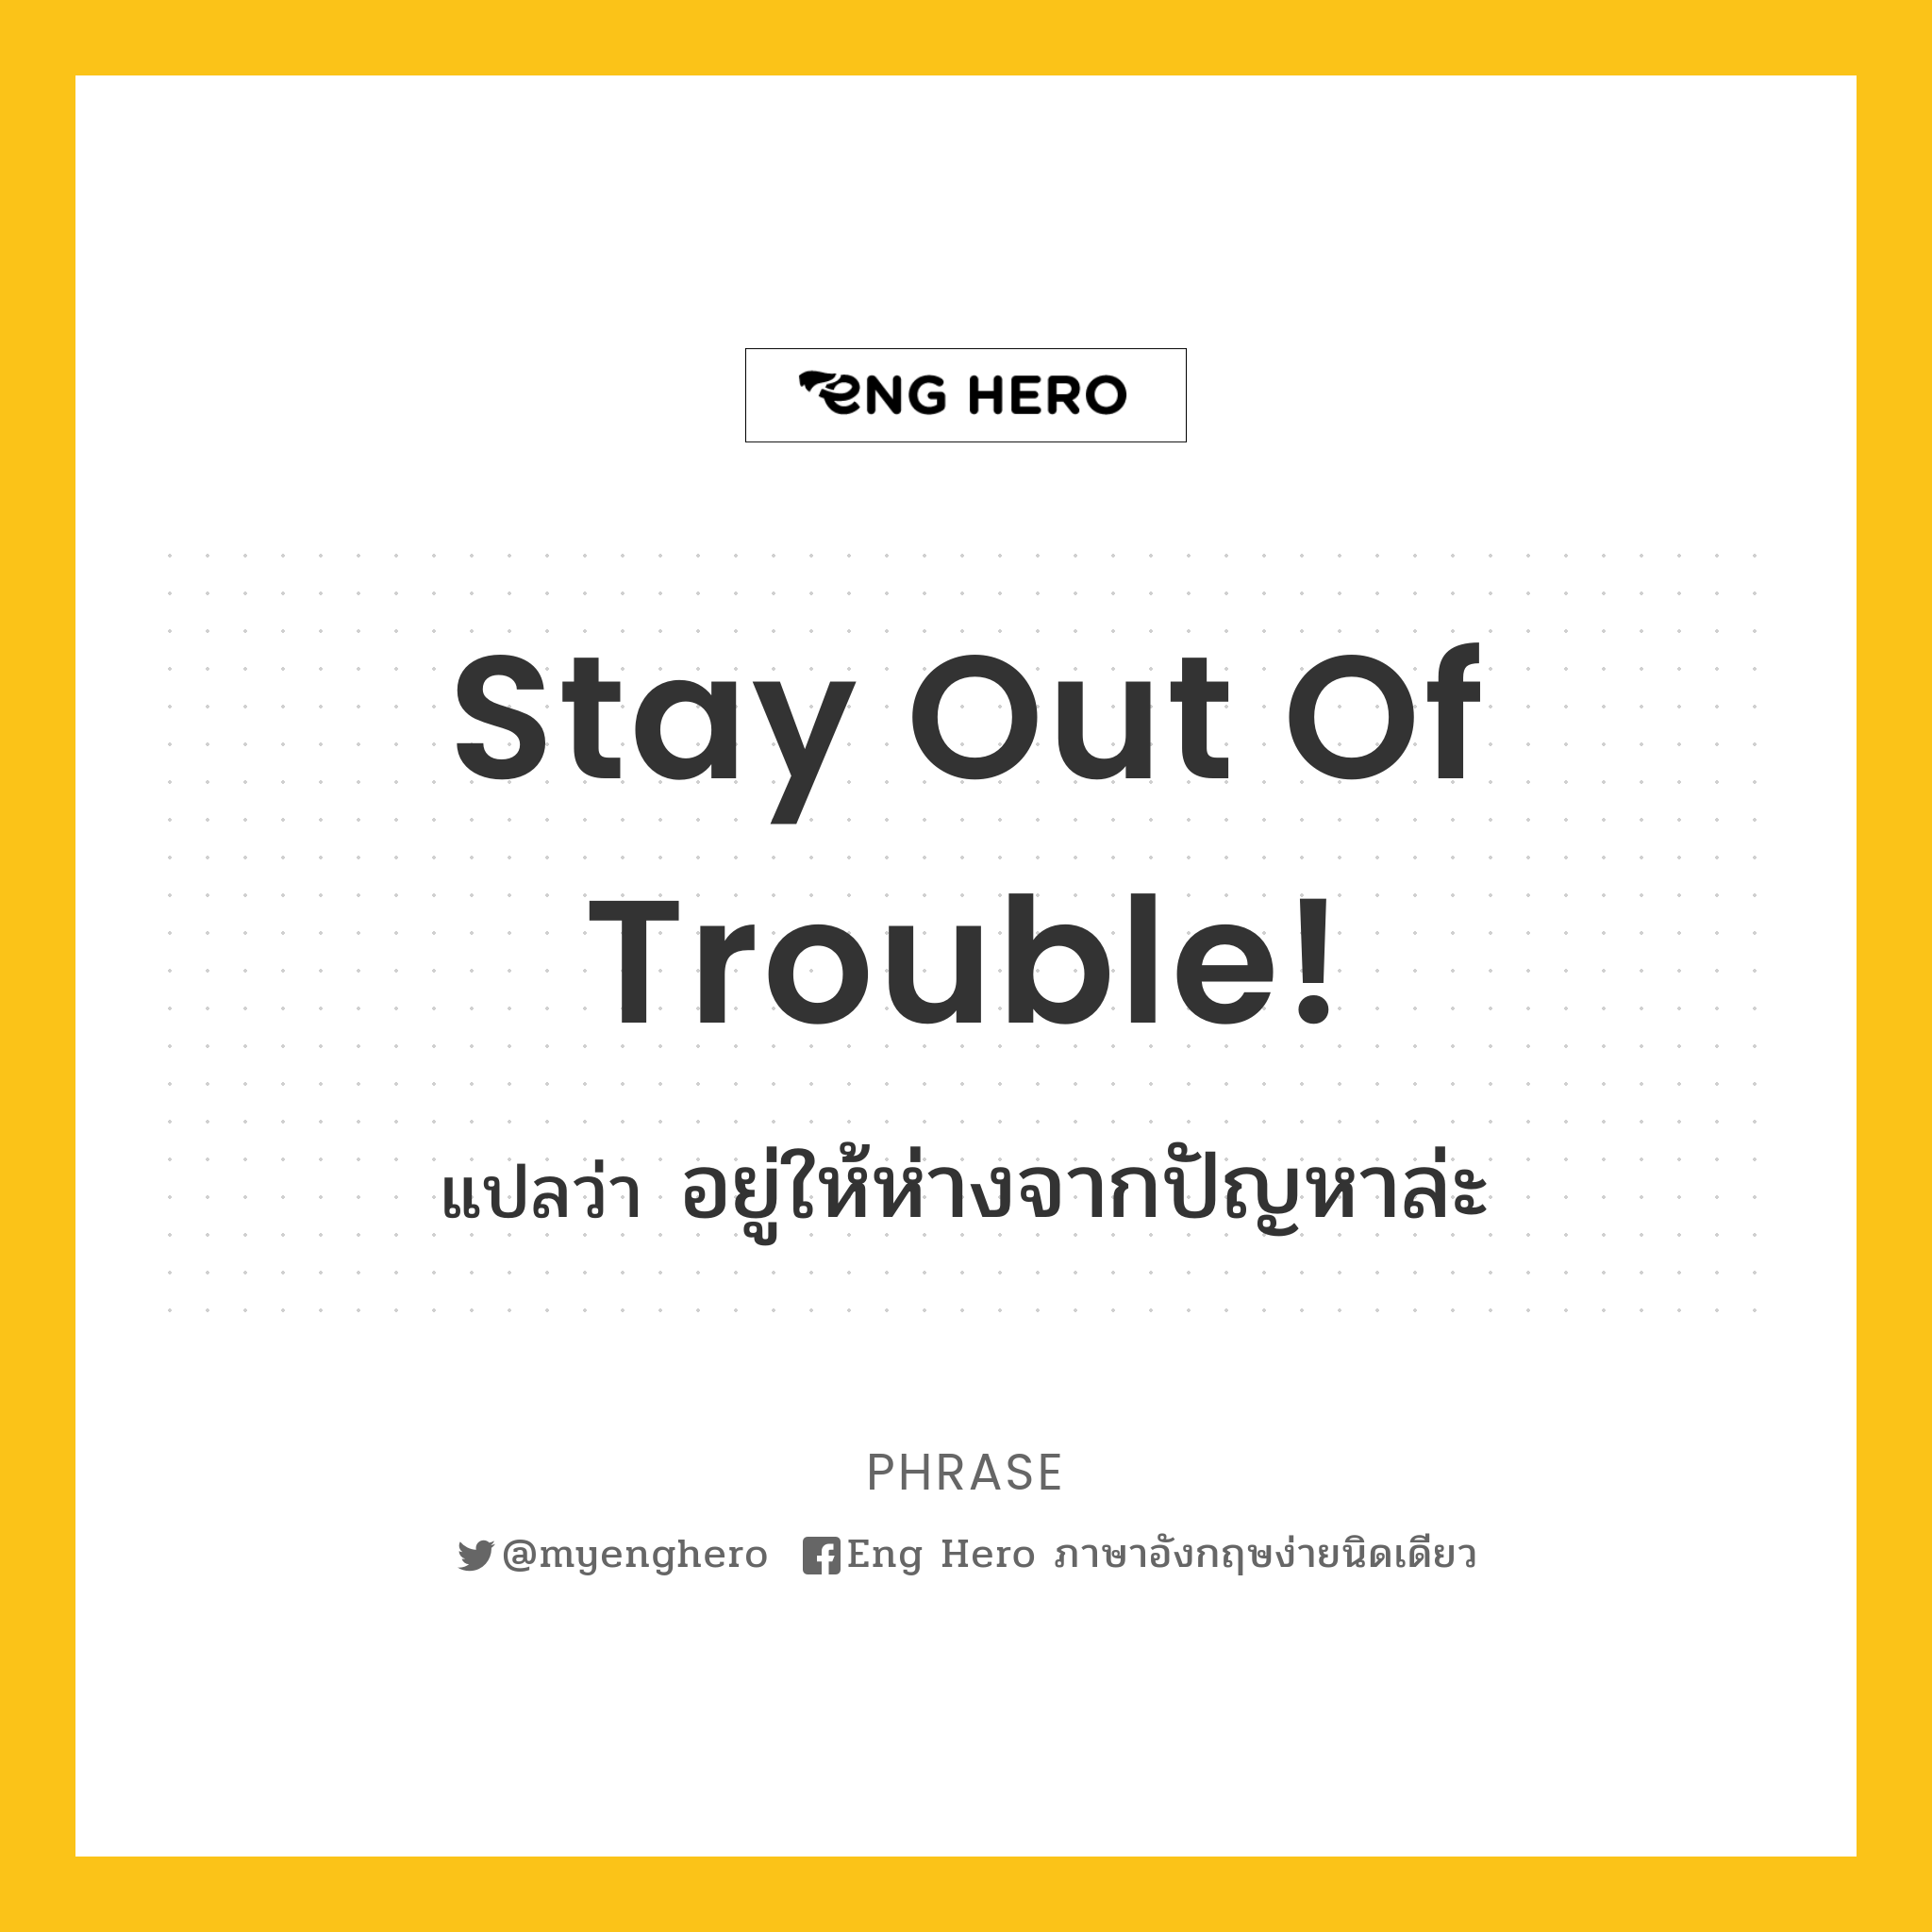 Stay out of trouble!